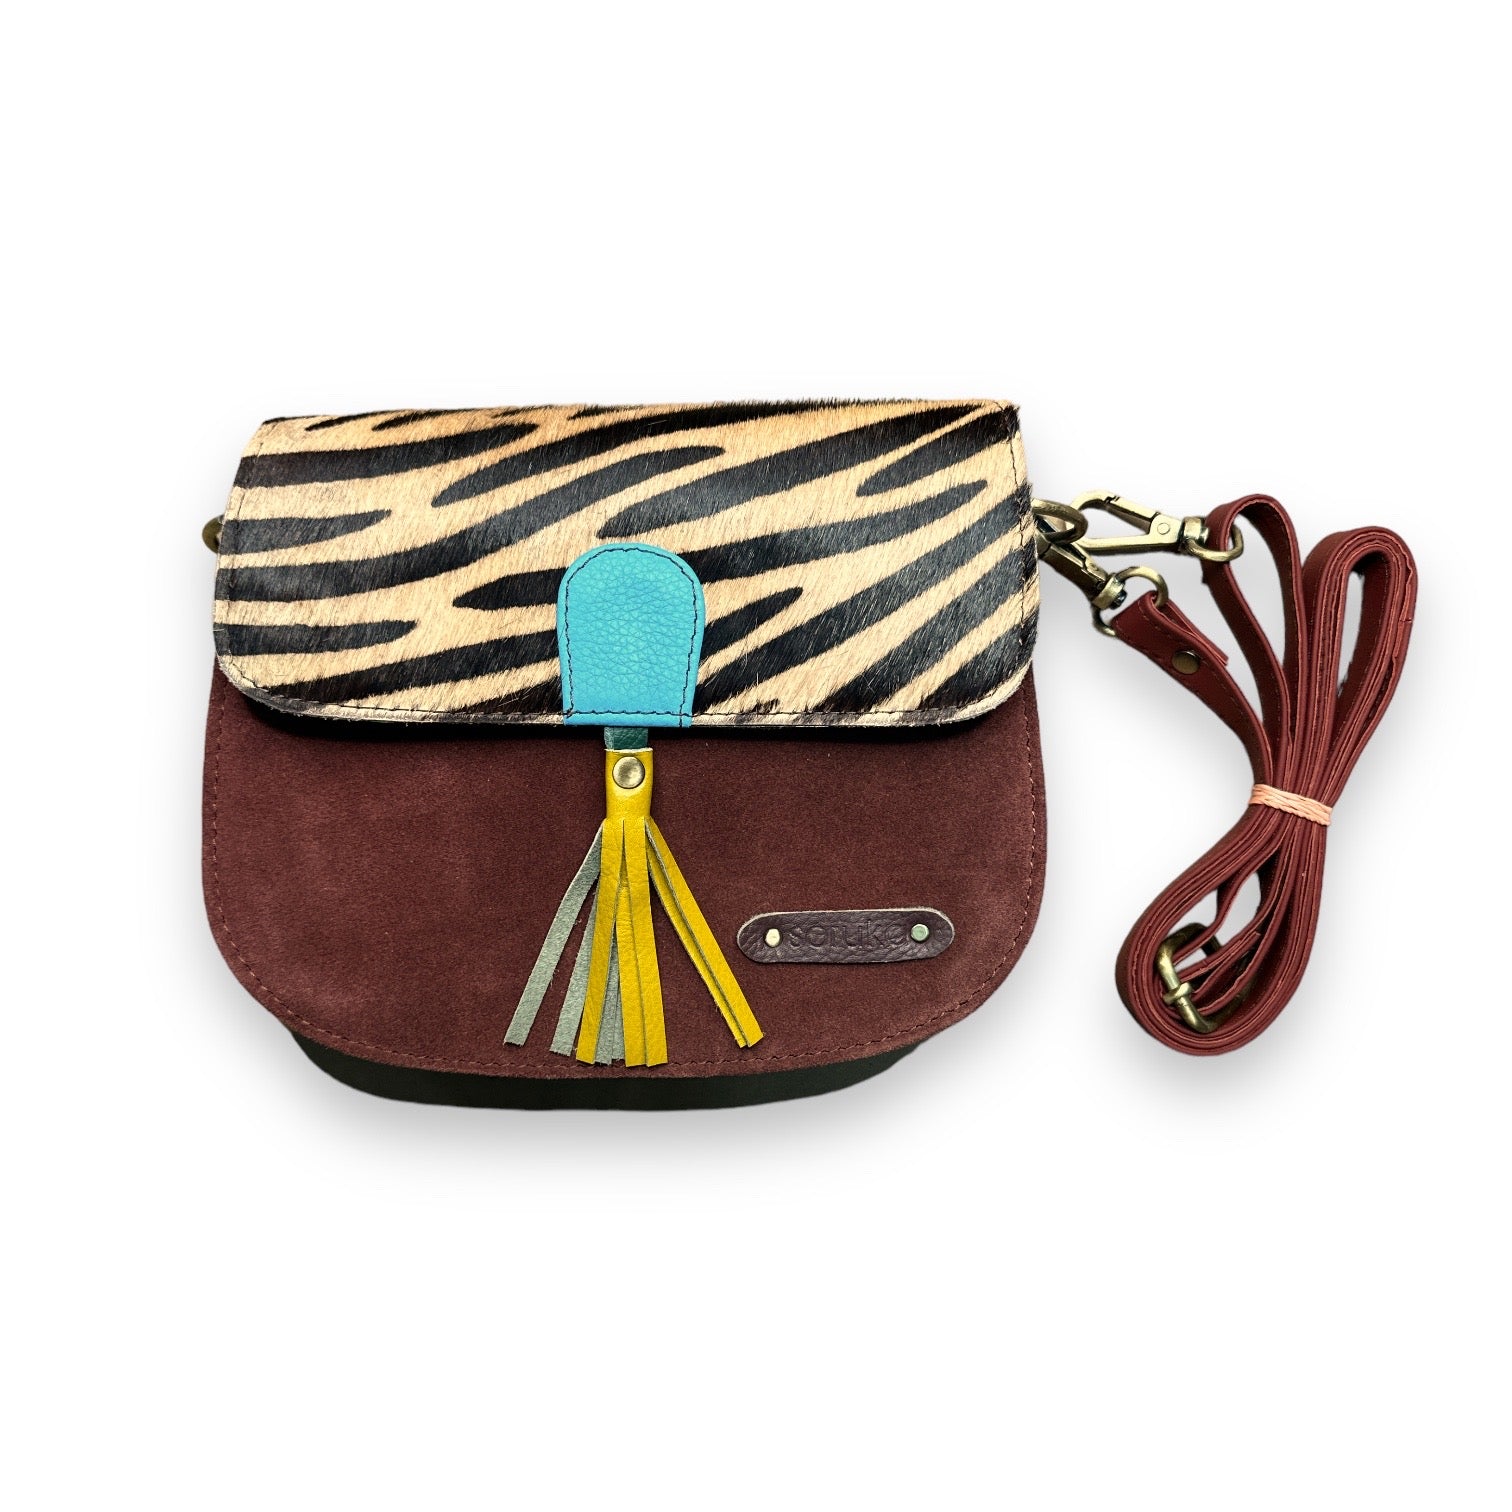 Lena Brick Red Suede and Tiger Print Crossbody Bag - Recycled